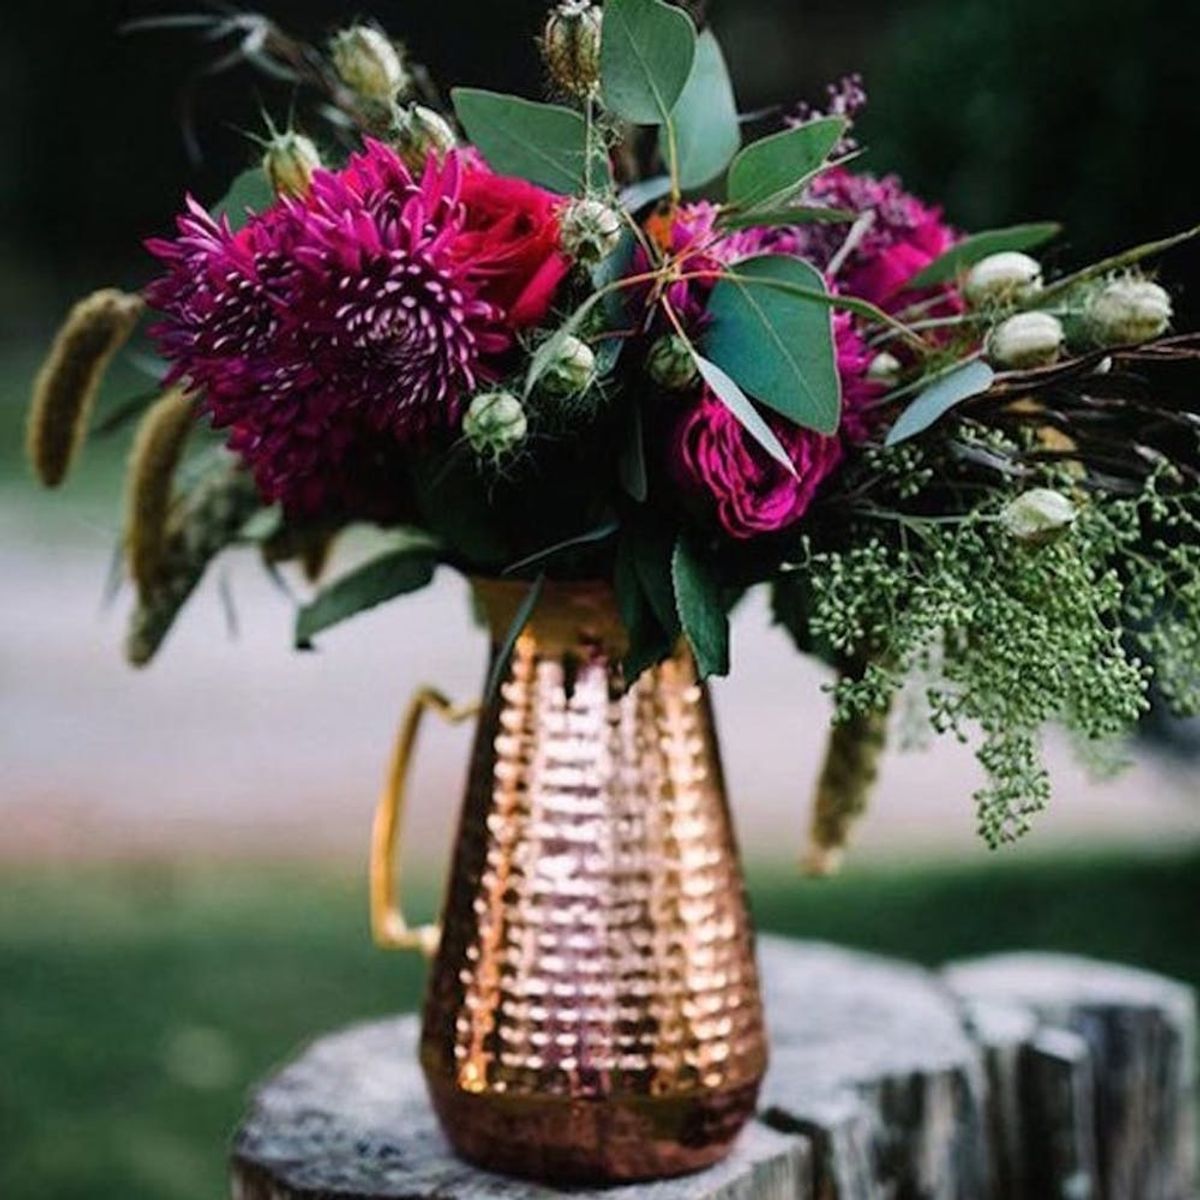 17 Autumn Wedding Trends You’ll *Fall* Head Over Heels For